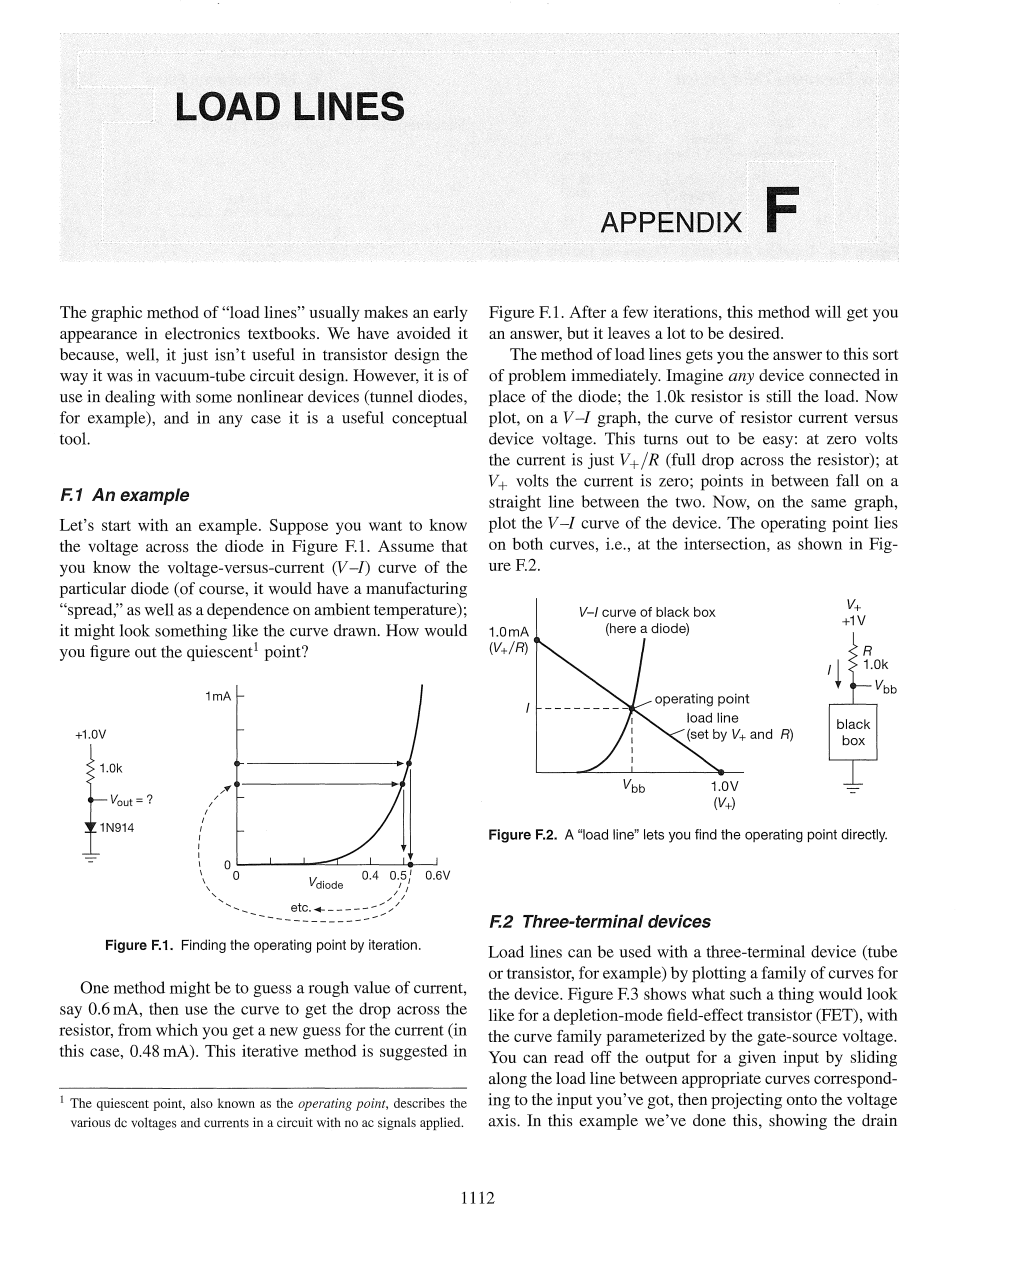 The Graphic Method of "Load Lines" Usually Makes an Early Appearance in Electronics Textbooks. We Have Avoided It Beca